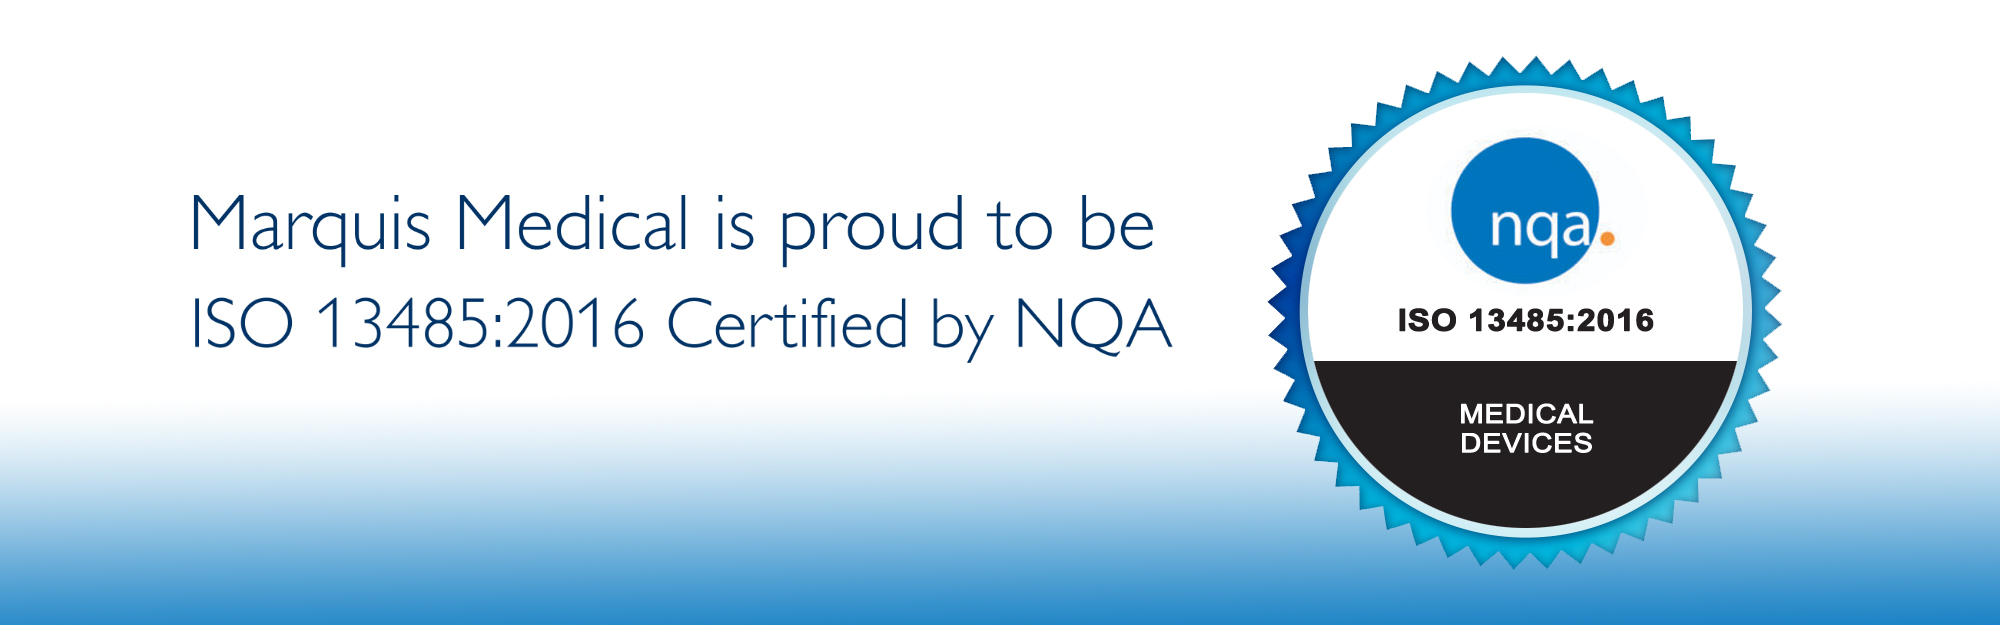 ISO 13485:2016 Certified by NQA